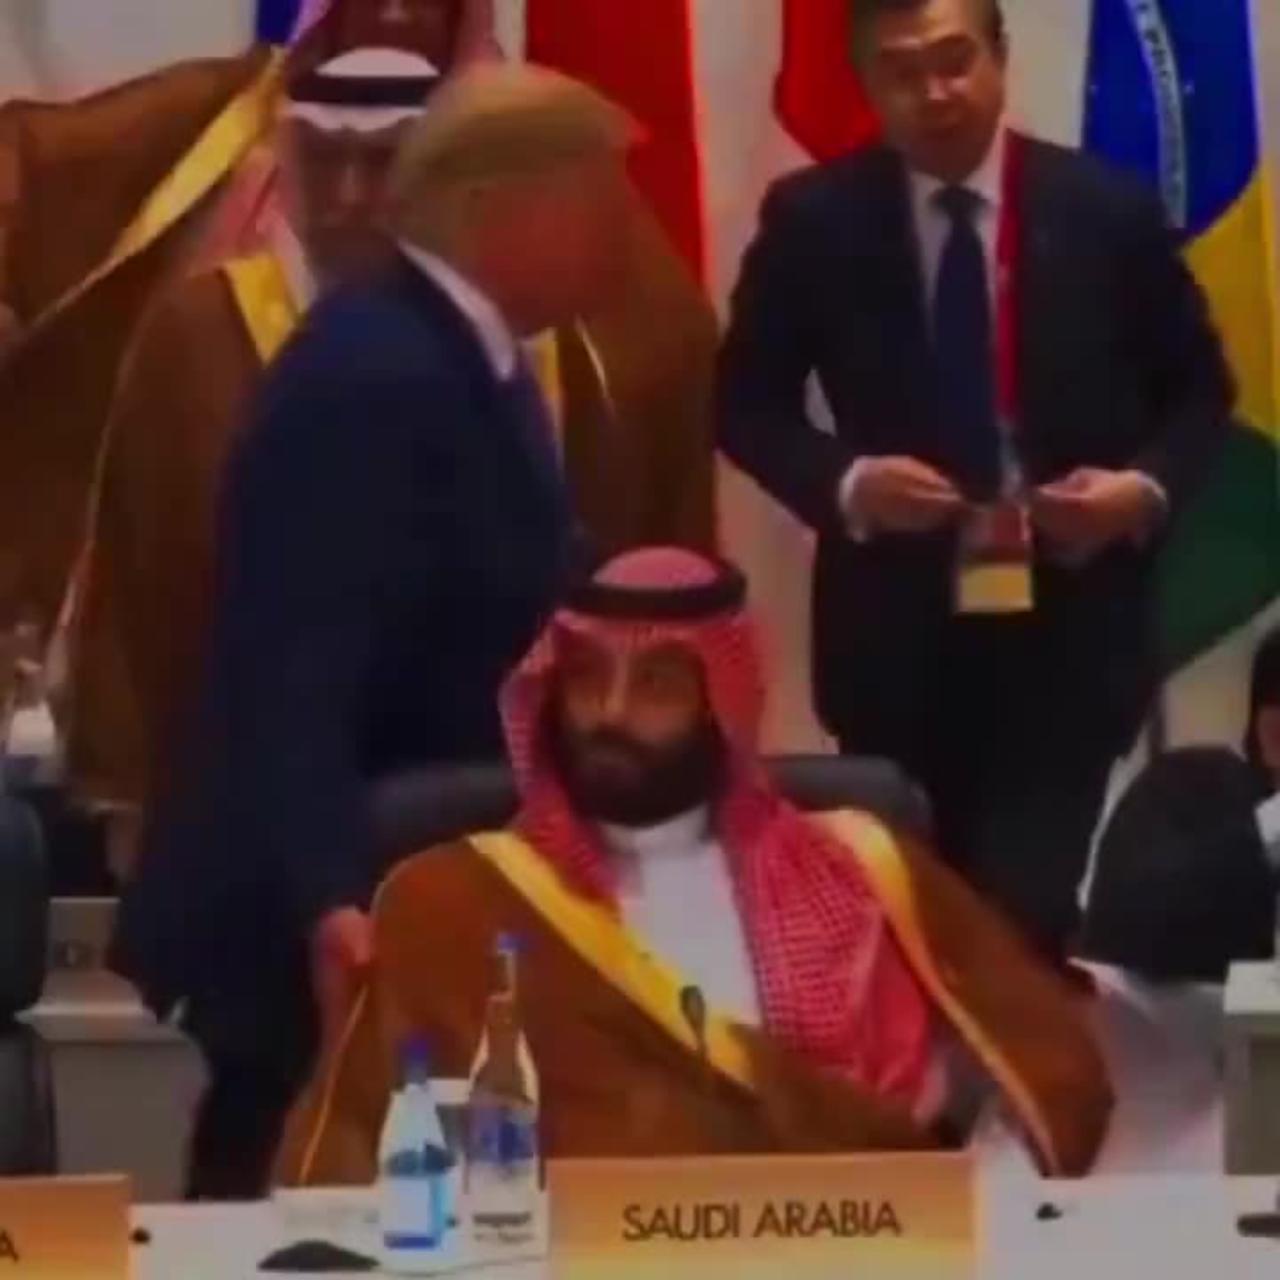 In Saudi Arabia it is forbidden to touch the Crown Prince, Trump